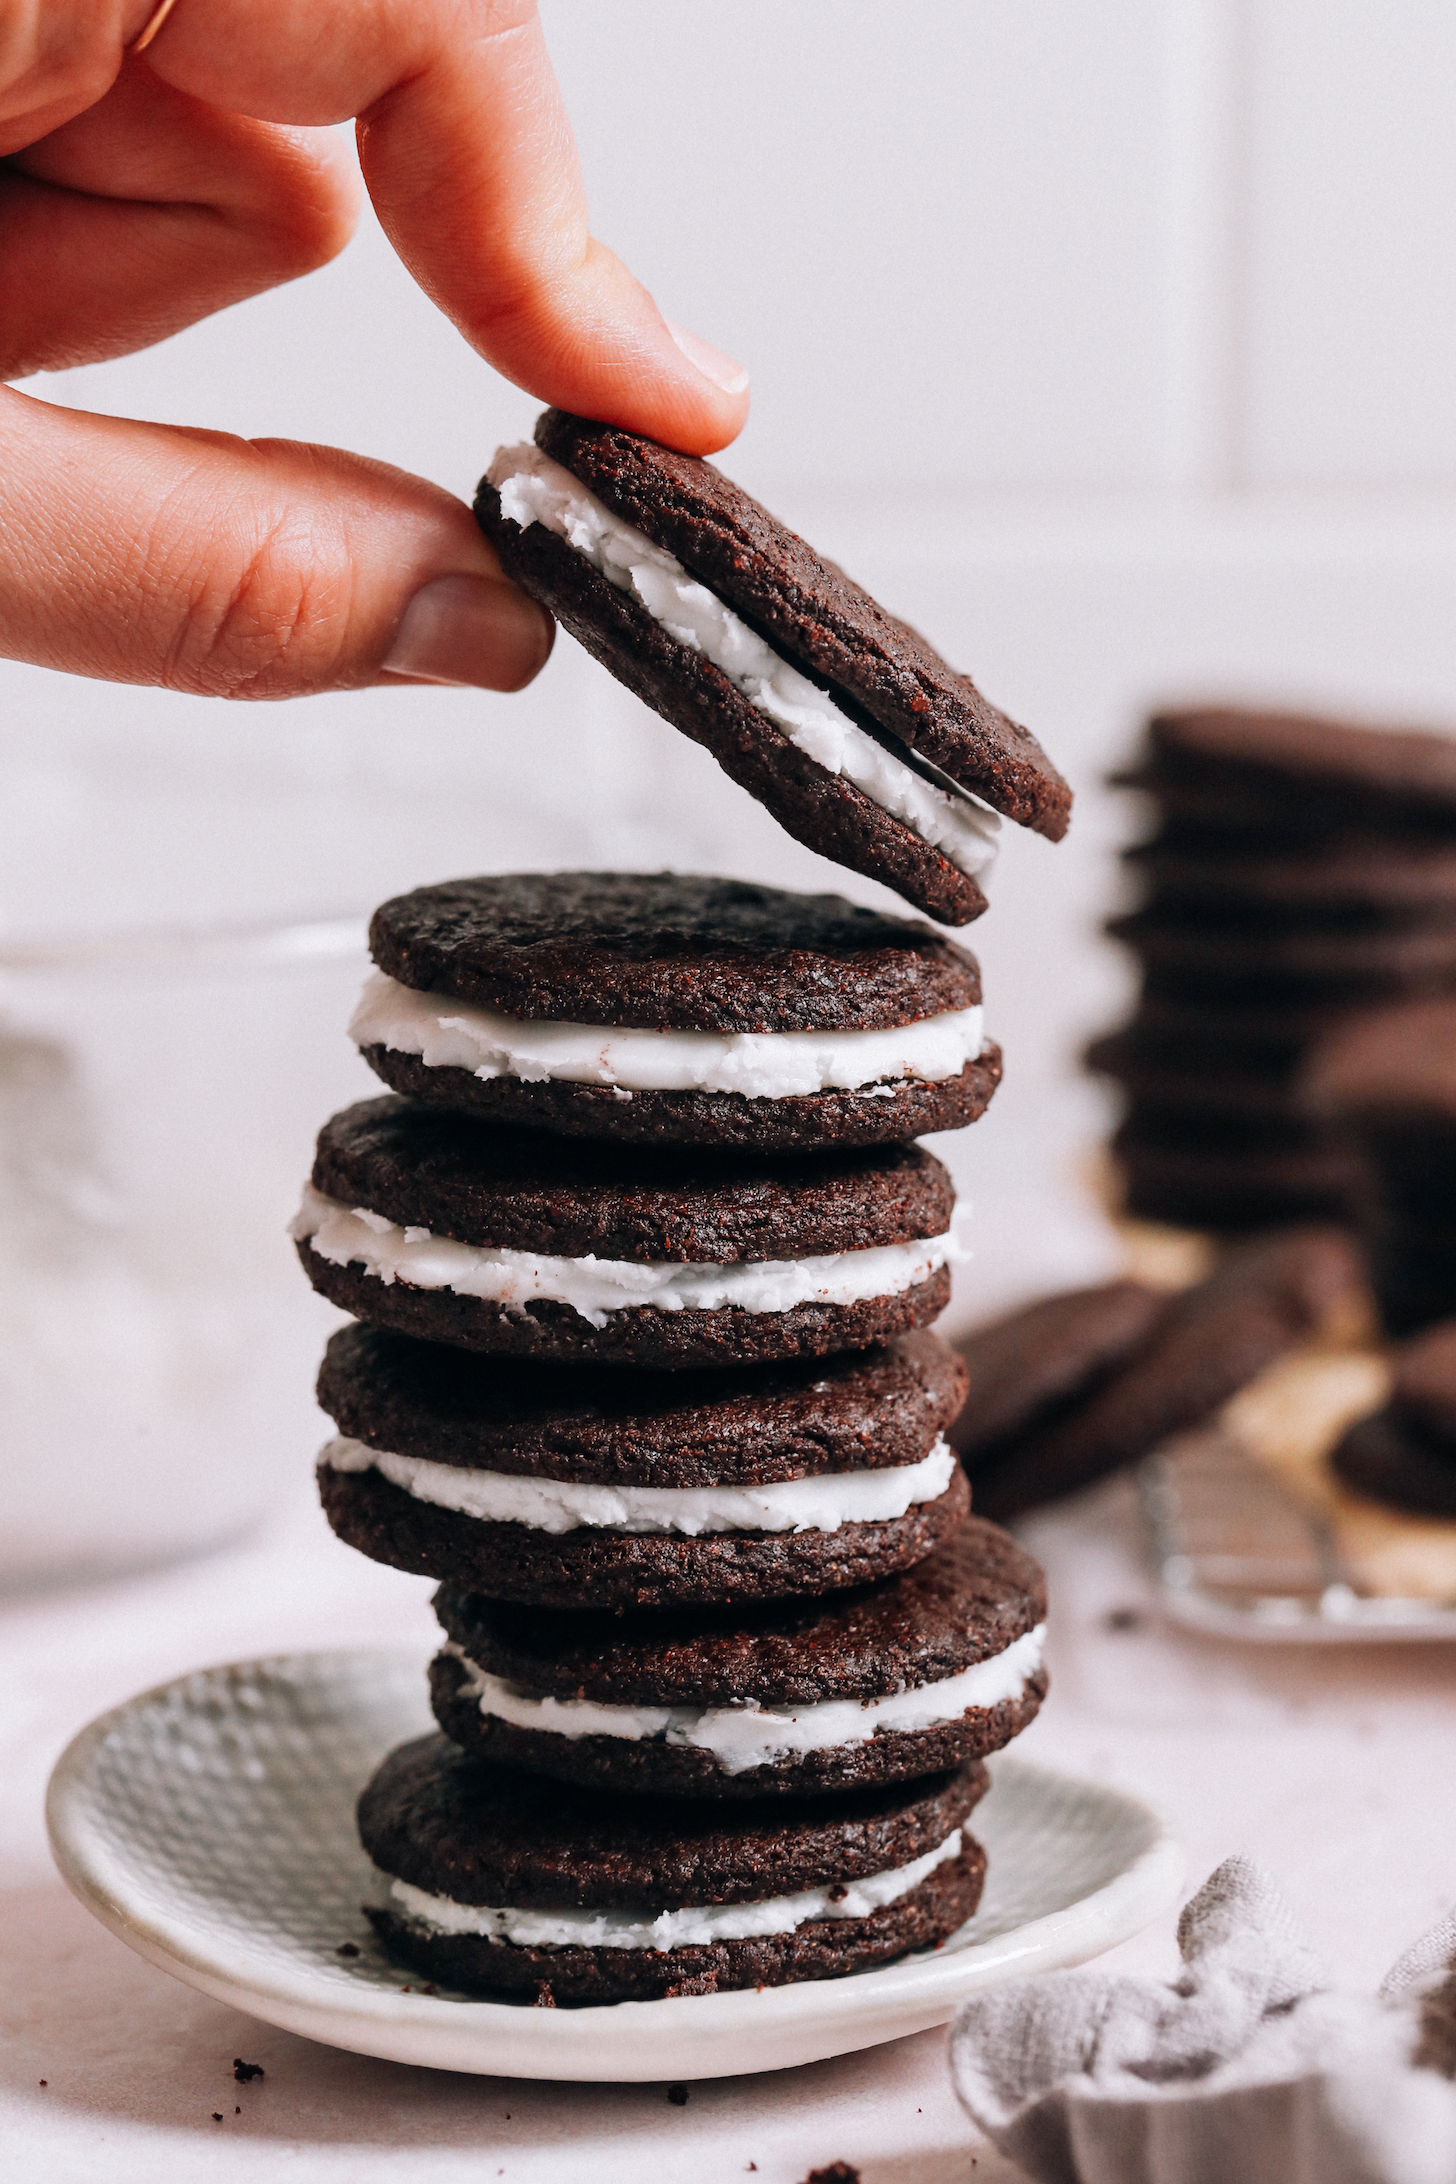 Picking up a vegan gluten-free Oreo from a stack of cookies